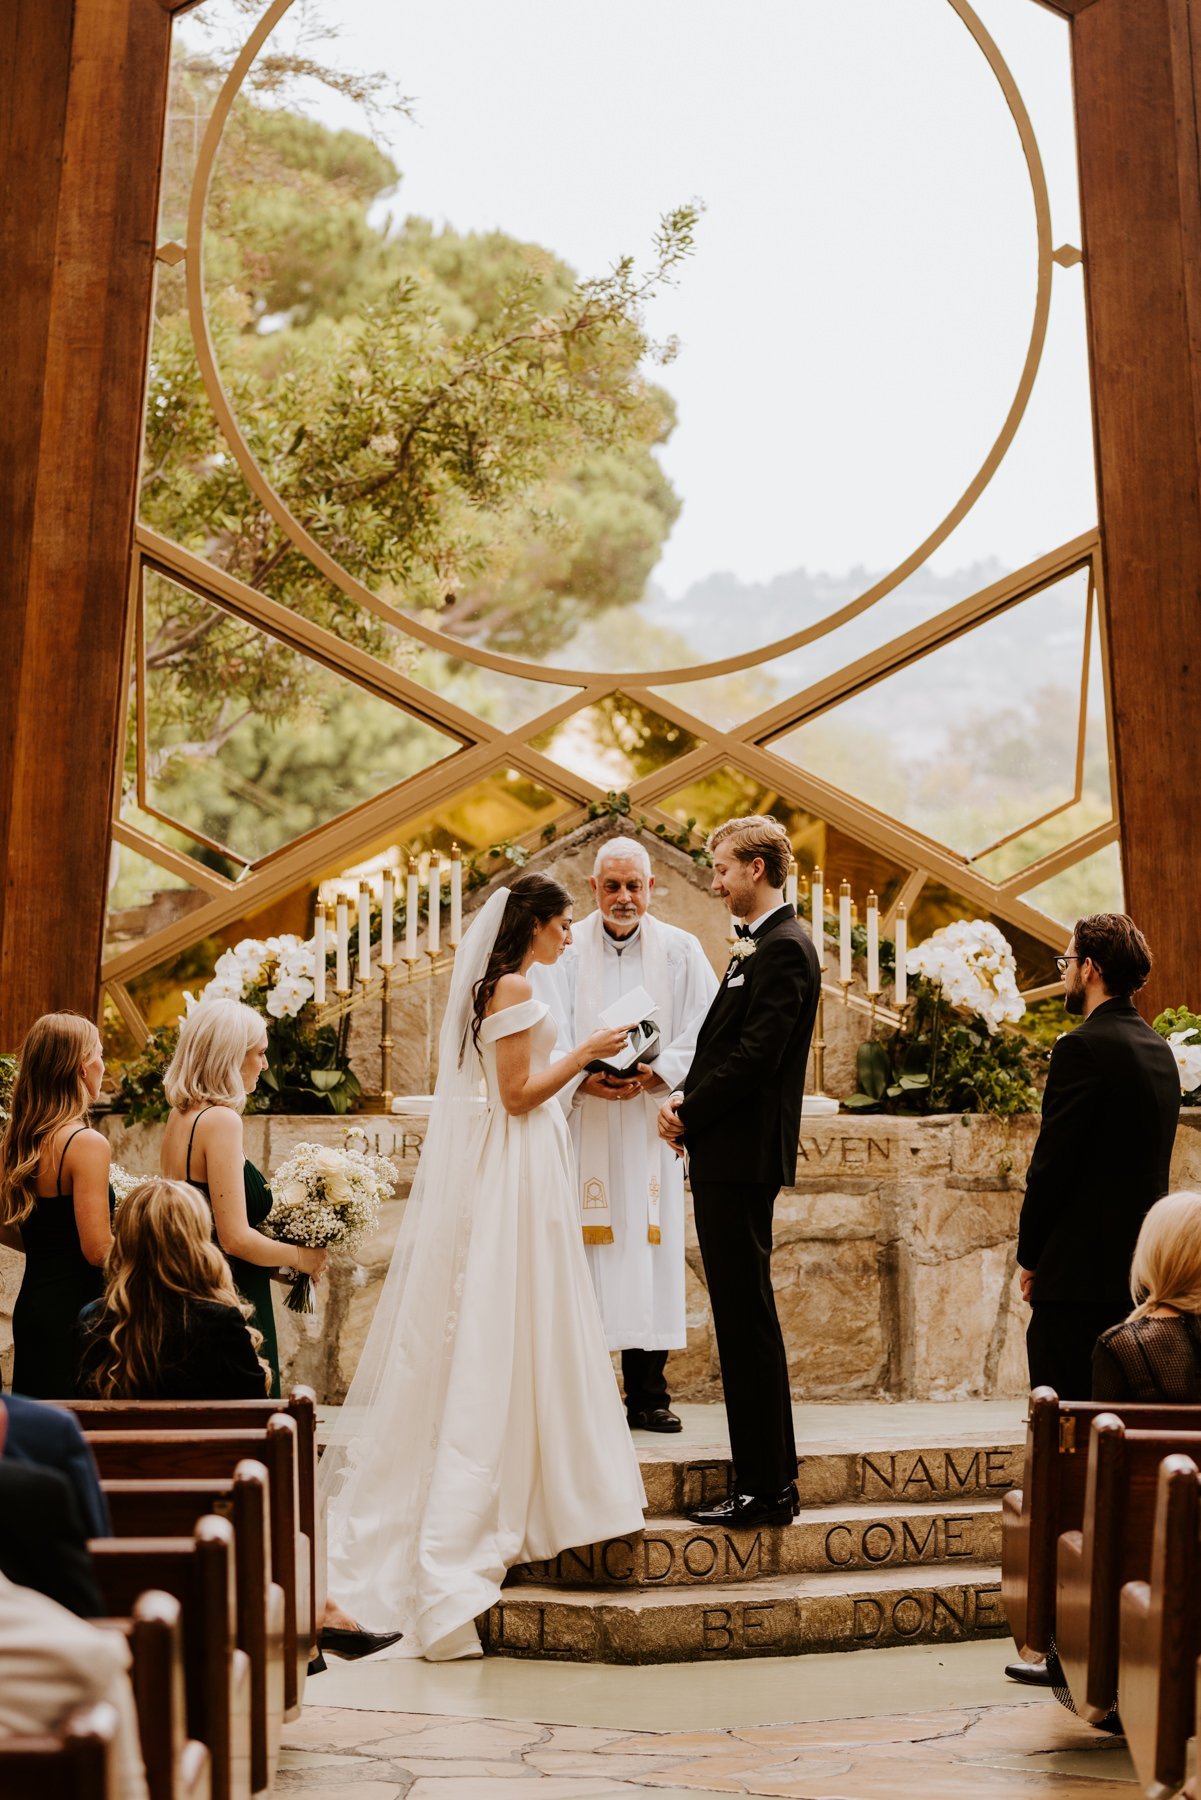 Bride and Groom Vows at Wedding Ceremony at Wayfarers Chapel, Photo by Tida Svy, Los Angeles Wedding Photographer